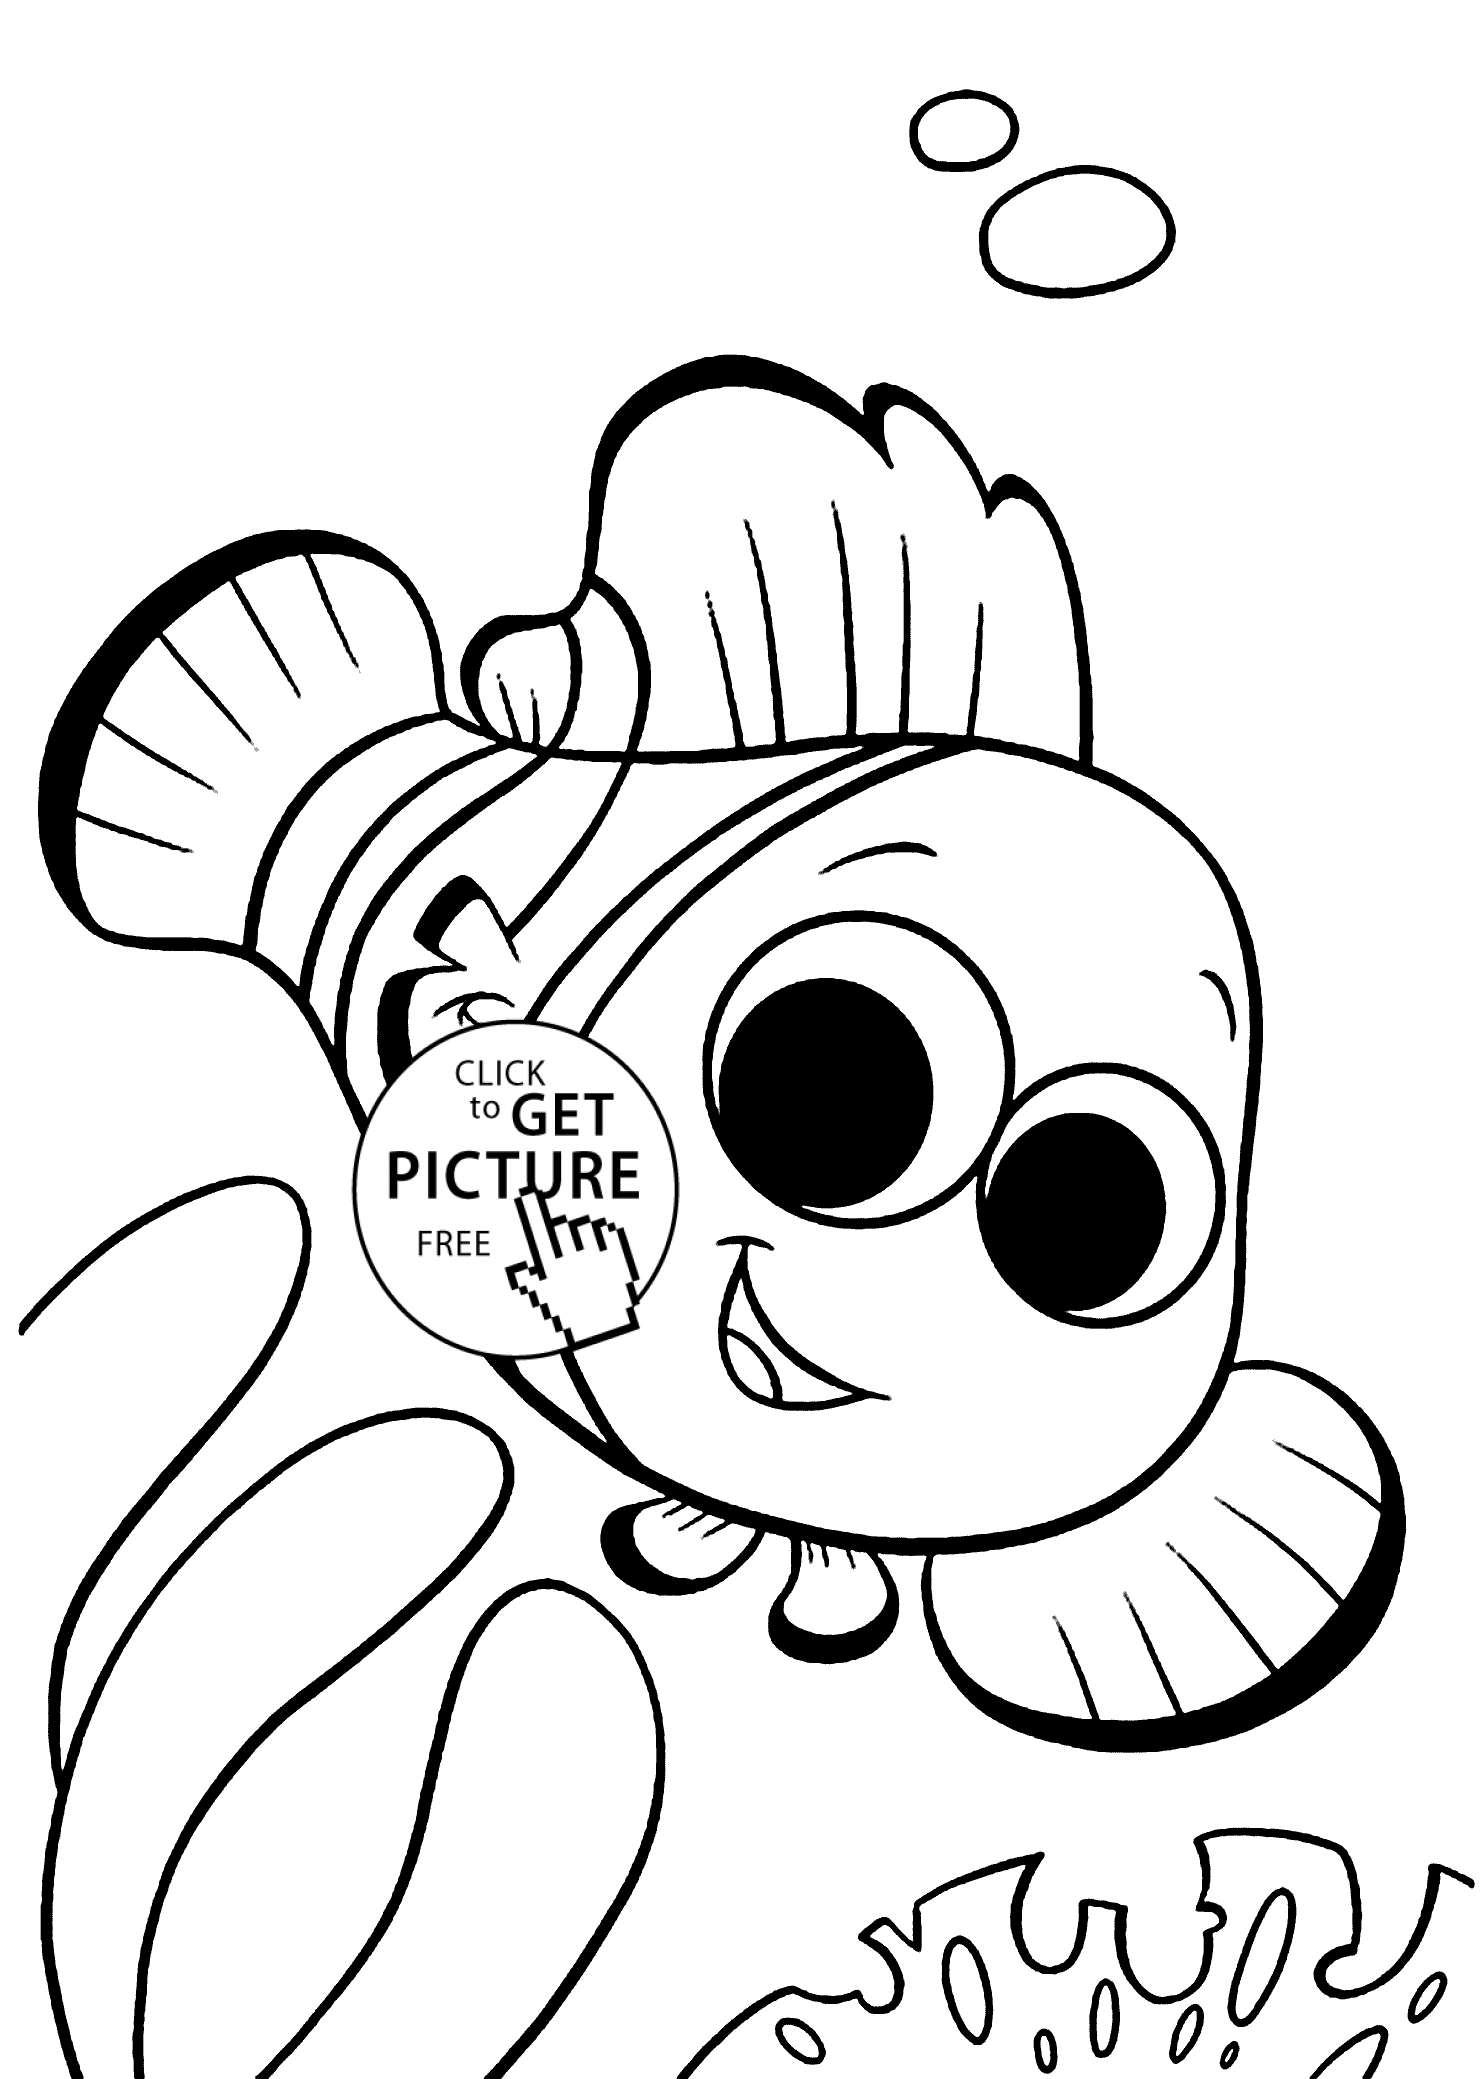 Disney Color Pages Free Finding Nemo Coloring Pages For Kids Printable Free